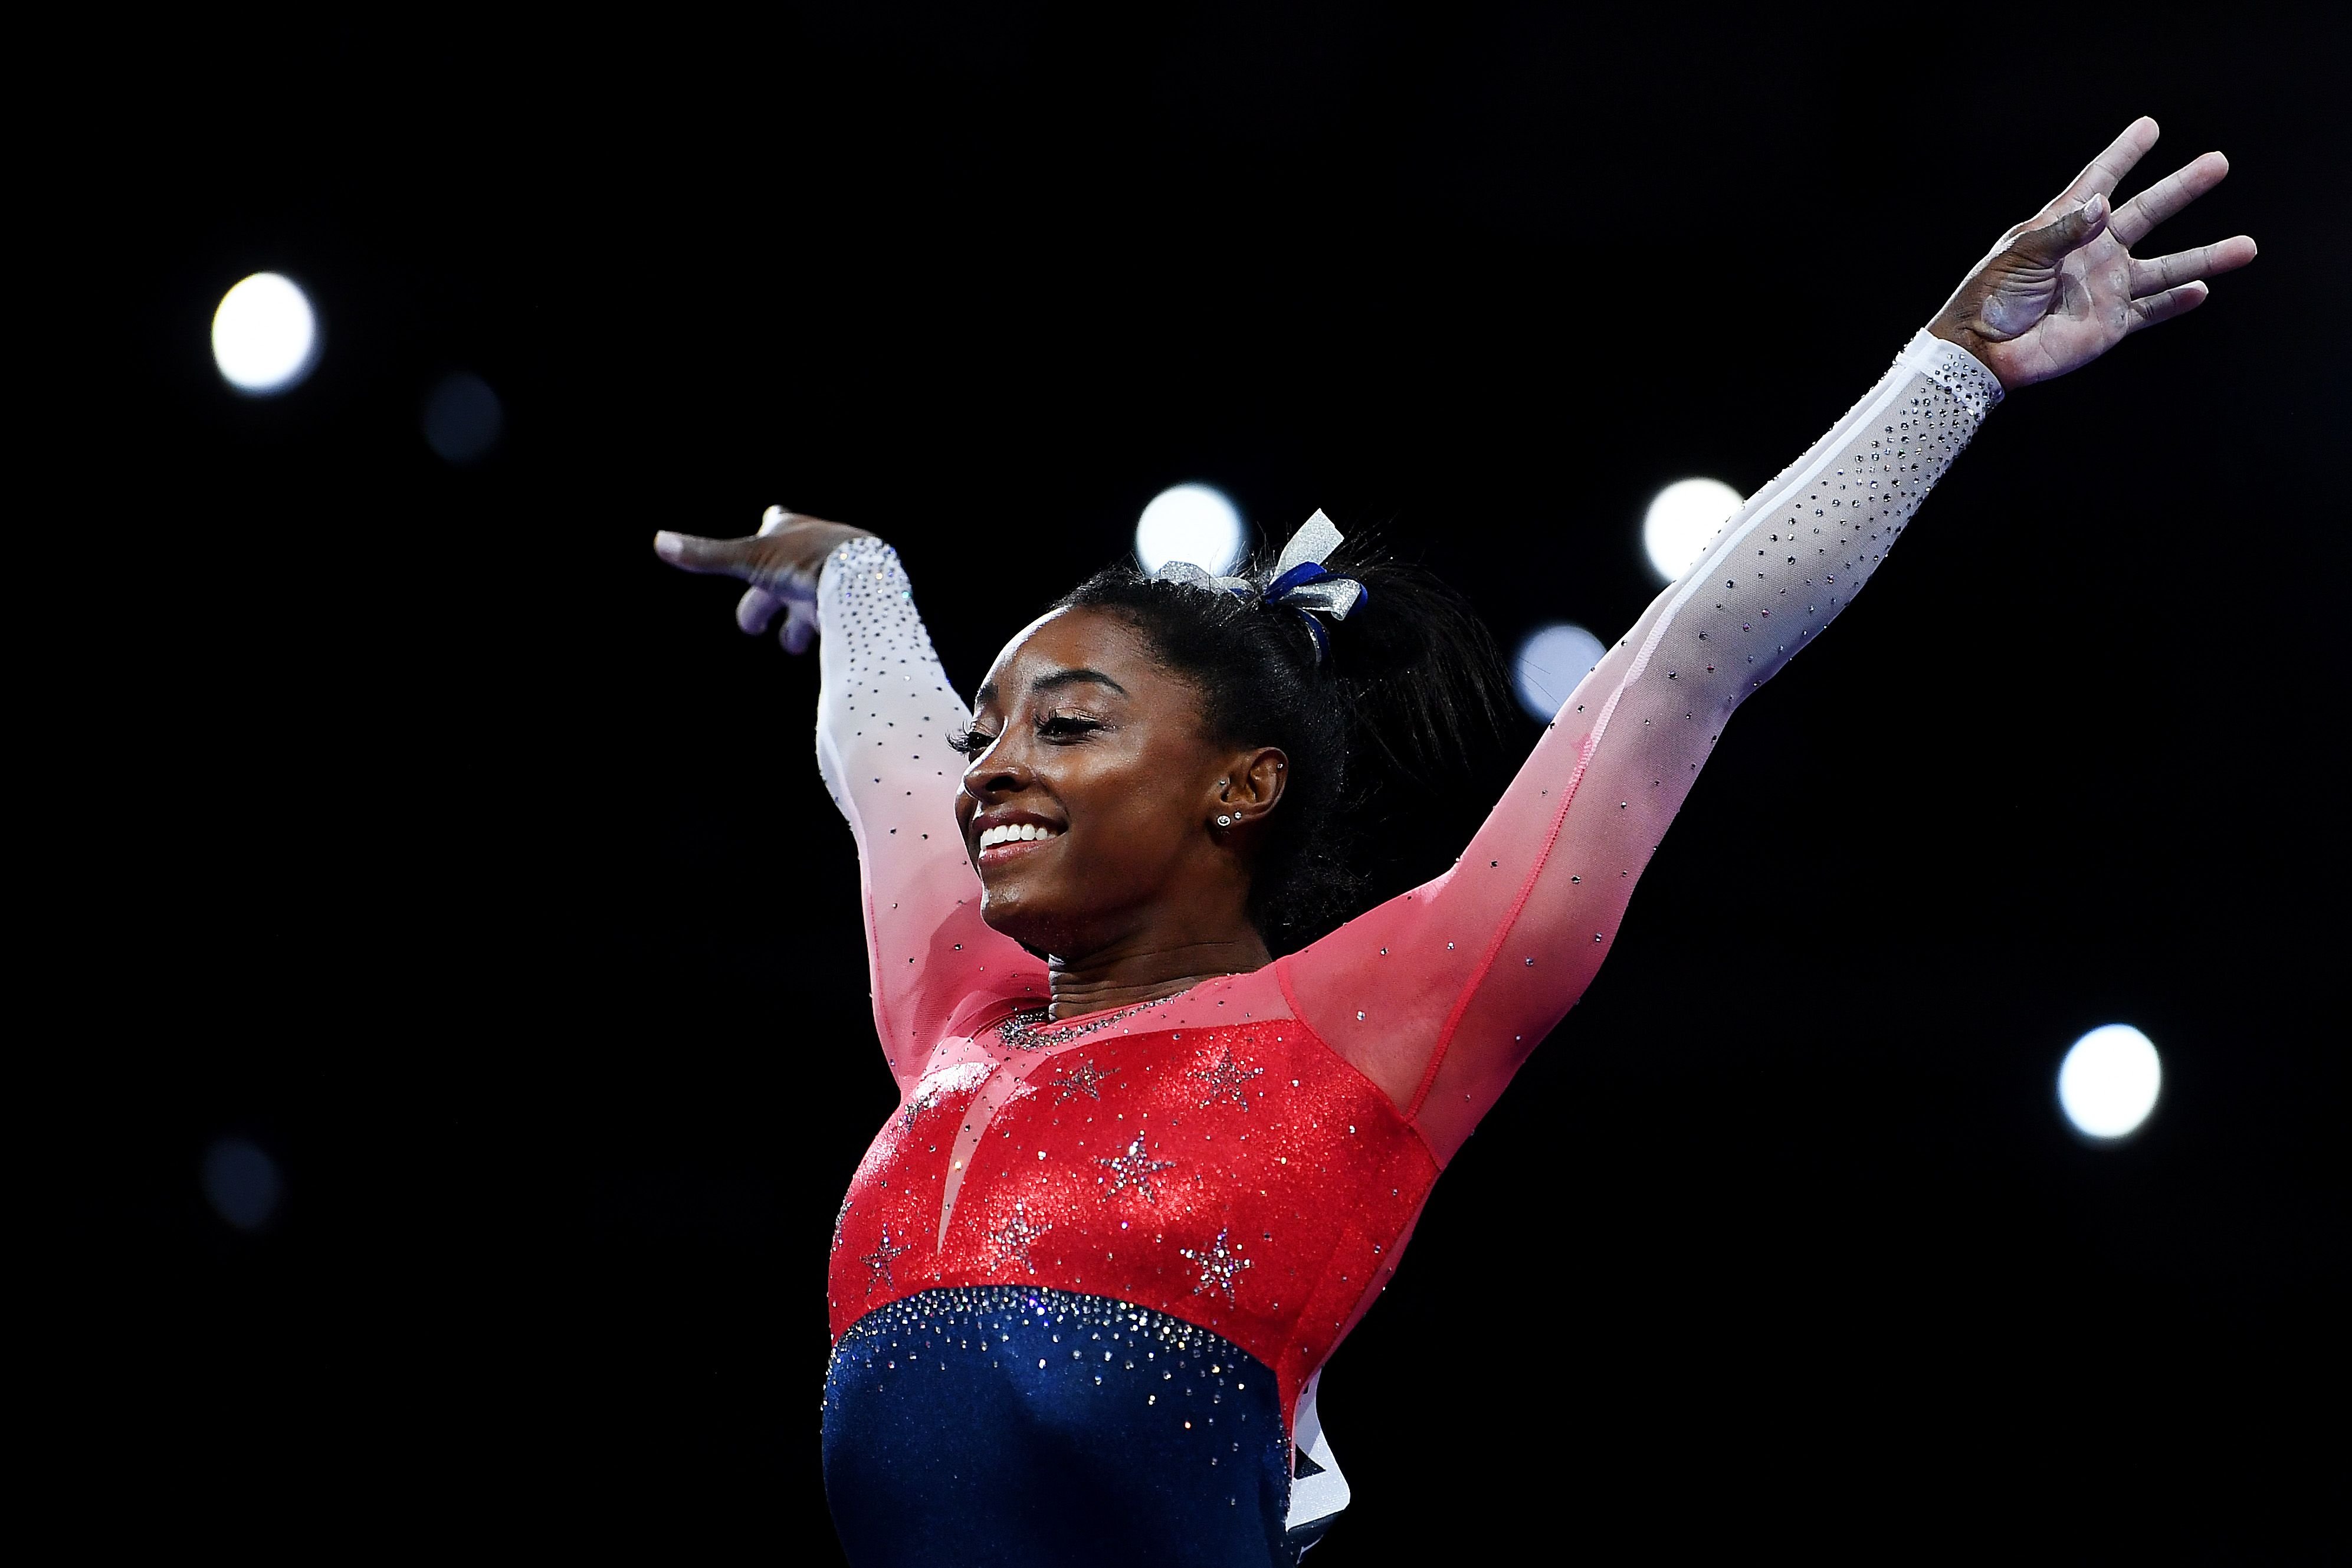 Simone Biles during the Women's Team Final on Day 5 of the FIG Artistic Gymnastics World Championships on October 08, 2019 in Stuttgart, Germany | Photo: Getty Images